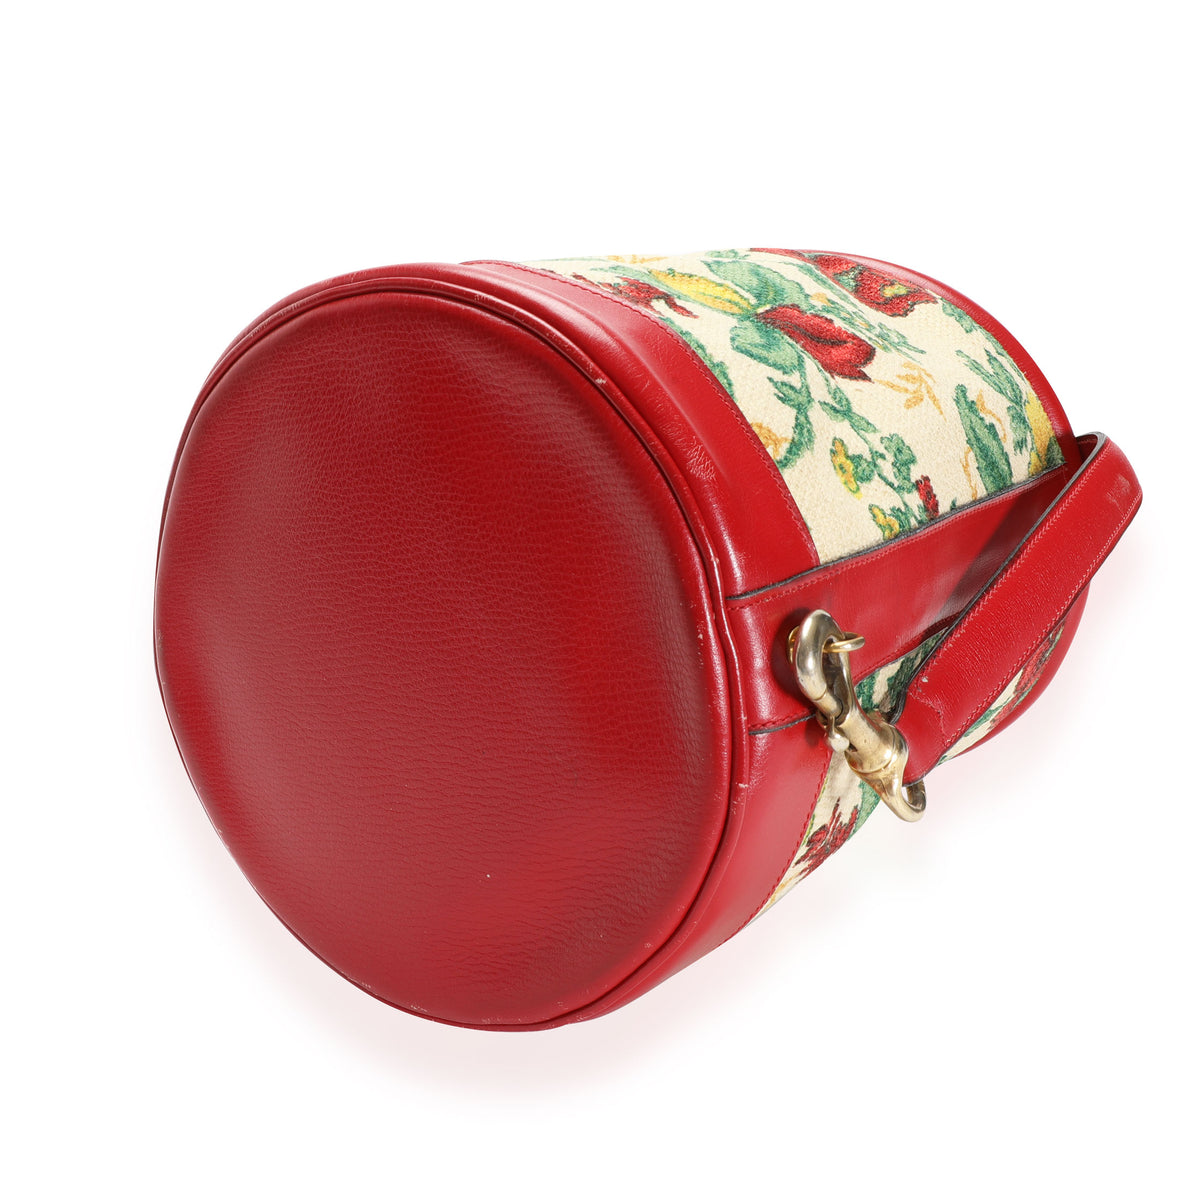 Gucci Vintage Red Leather & Floral Tapestry Bucket Bag